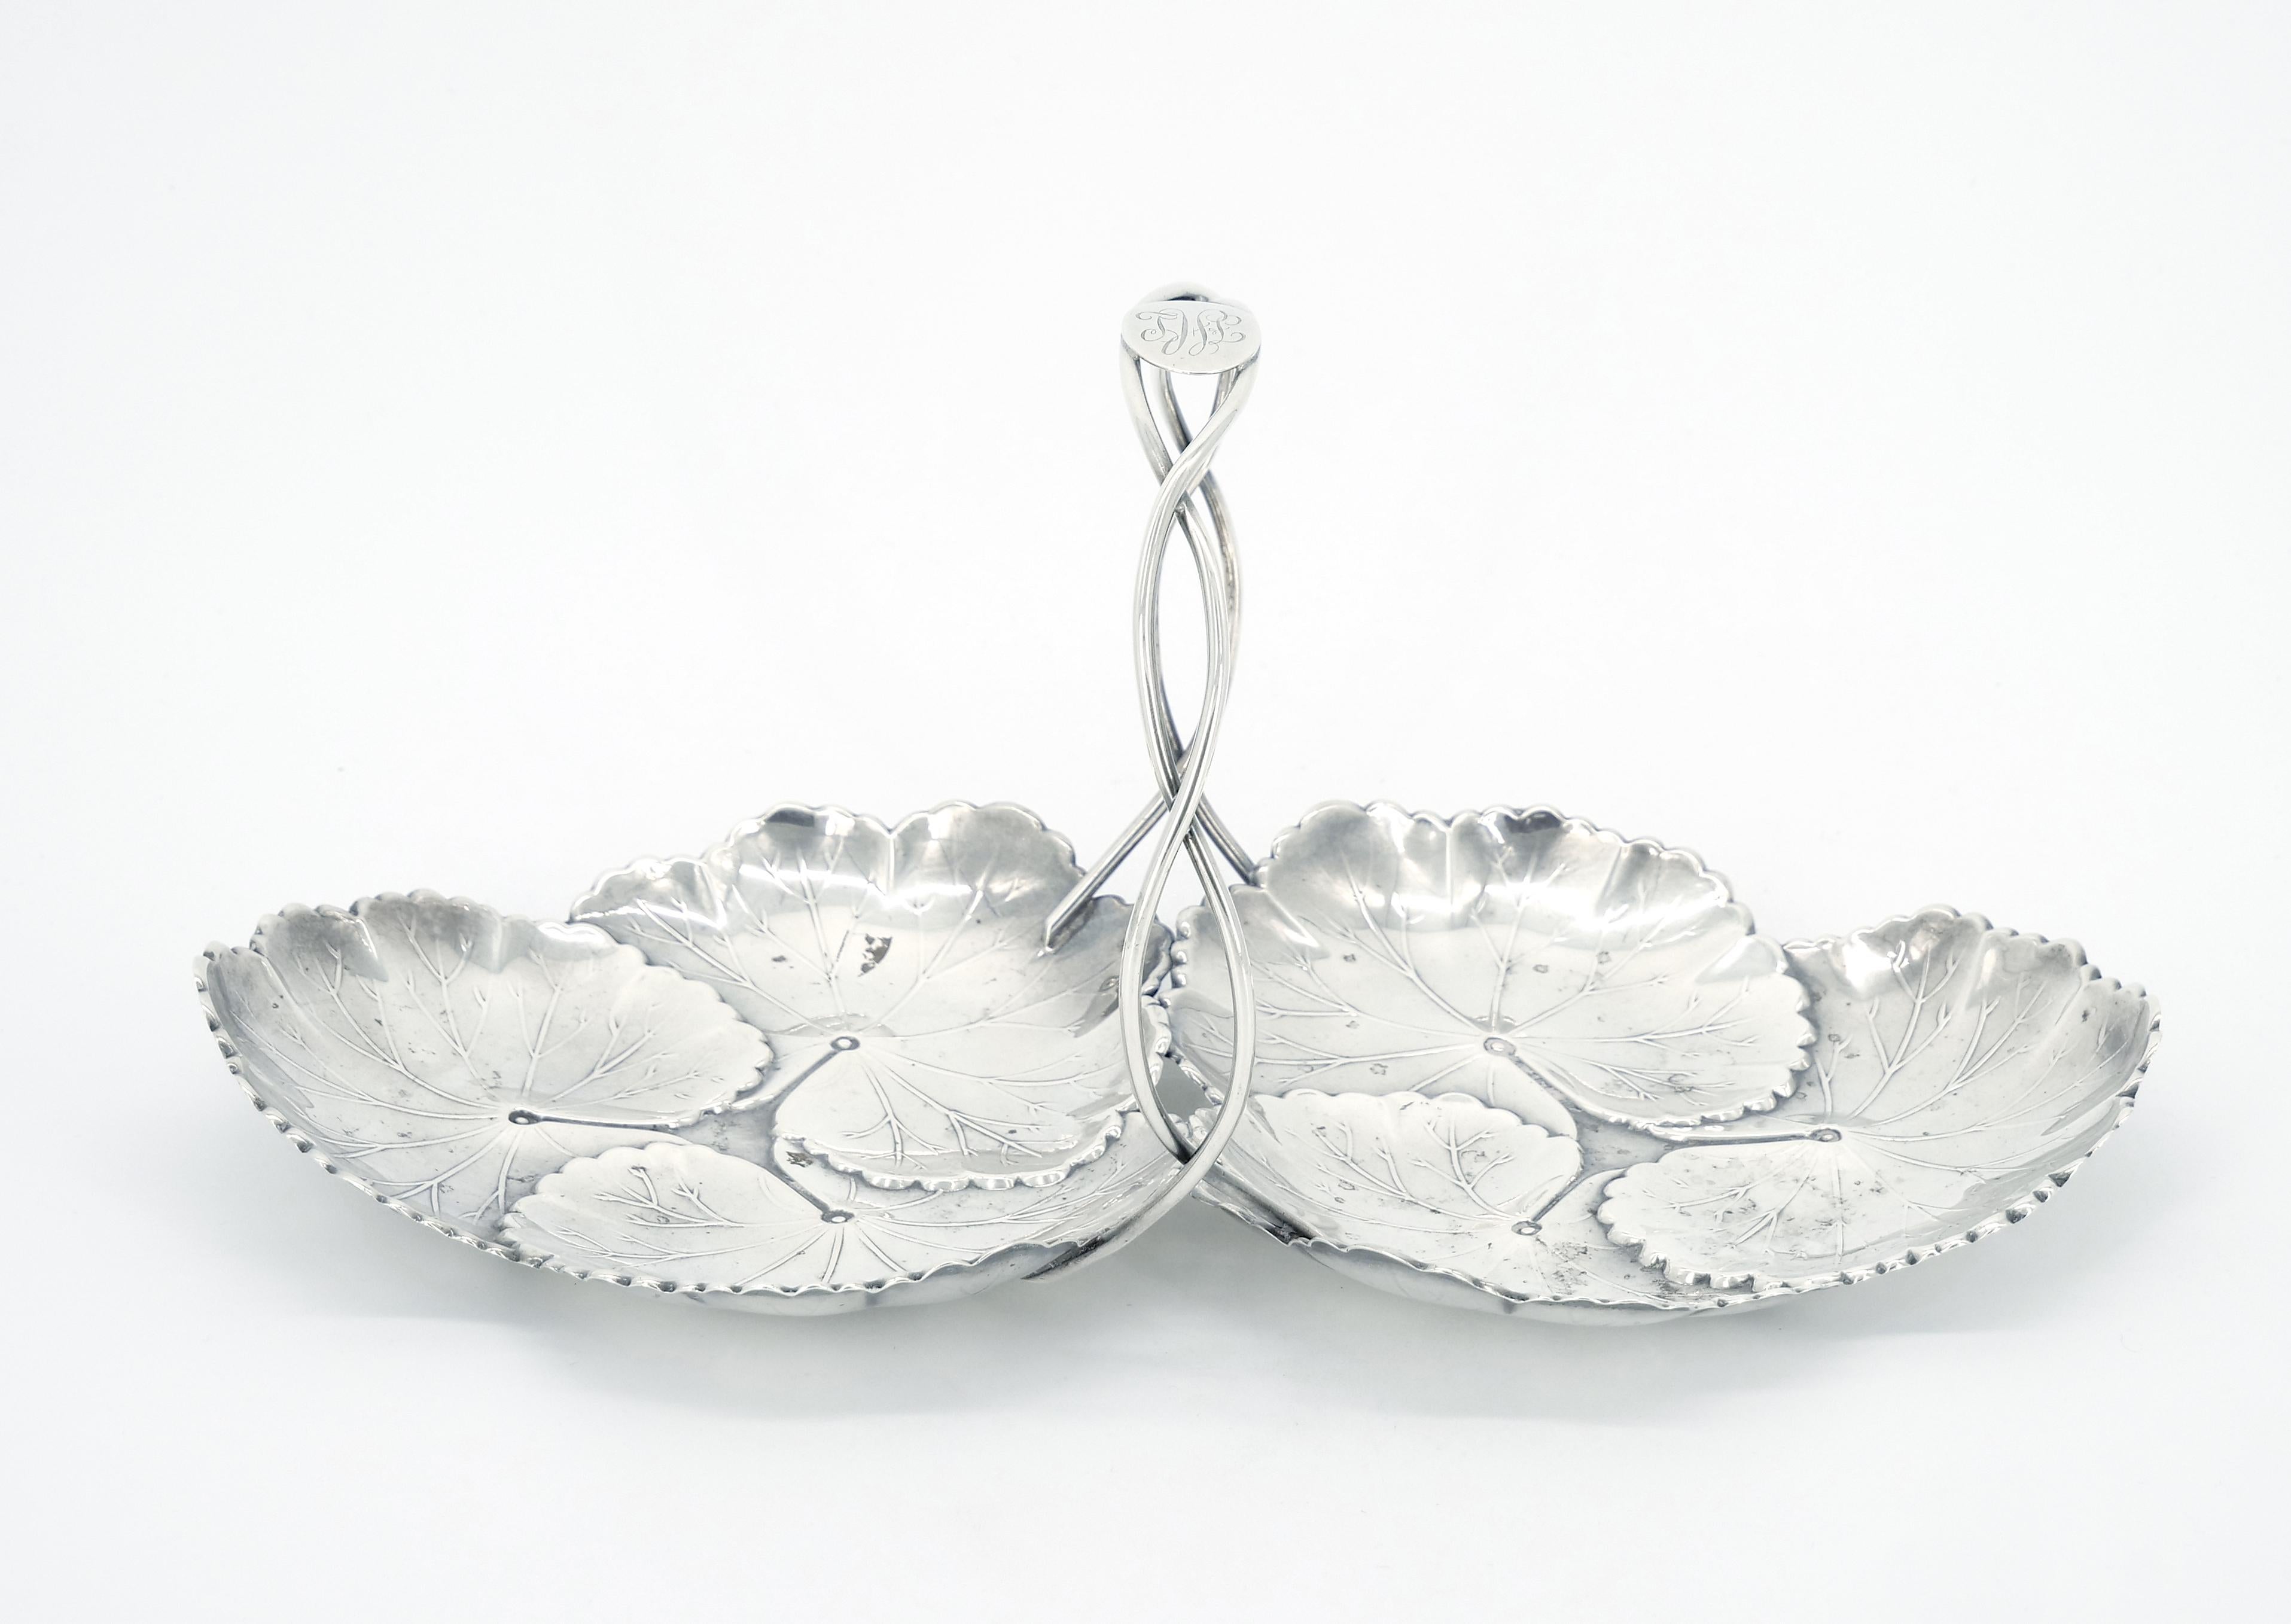 American Sterling Silver Serving Dish with Water Lily Pad Motif / Reed & Barton For Sale 4